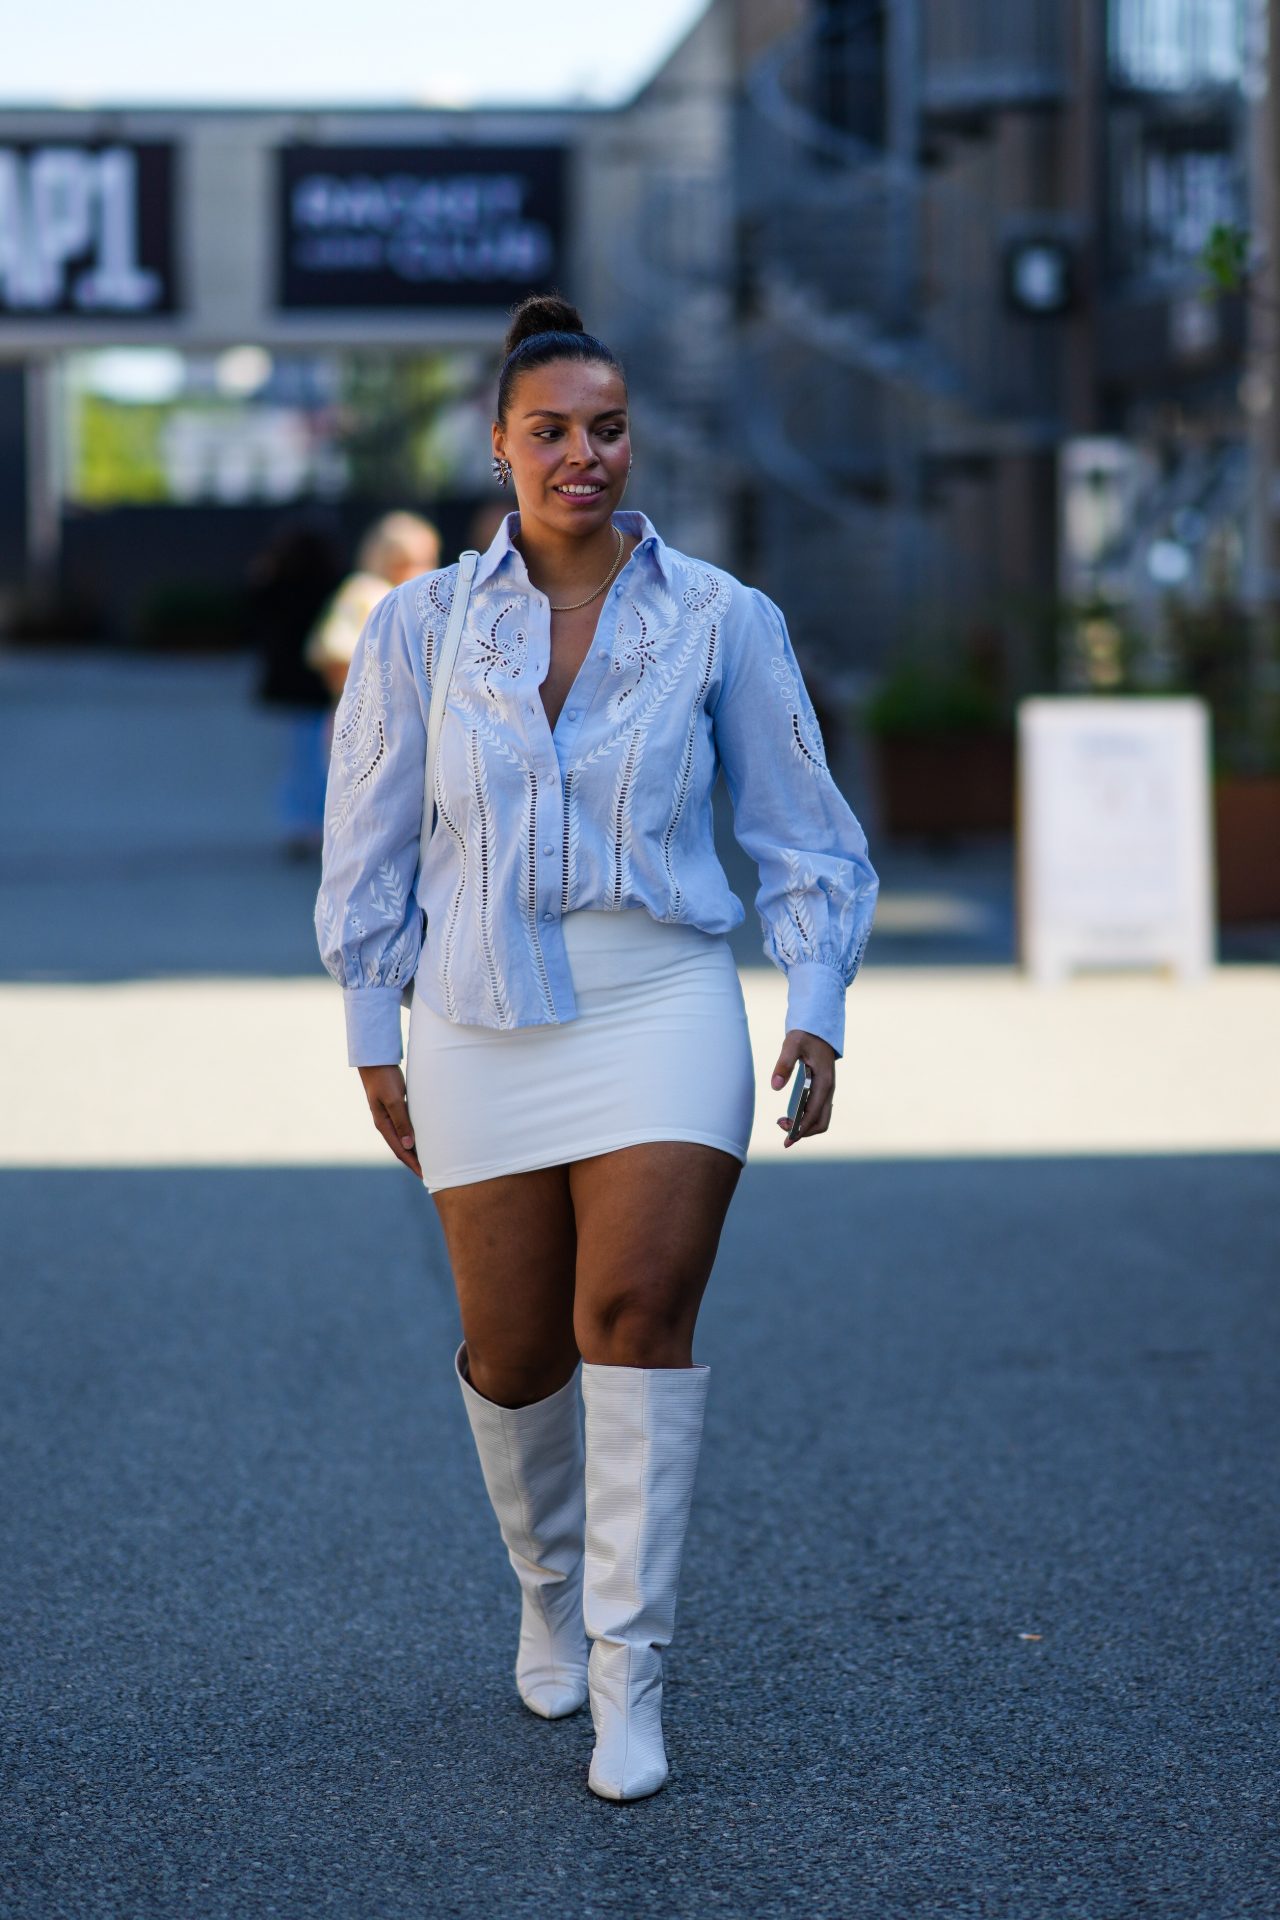 The 9 Rules for Wearing a Mini Skirt in 2022 - PureWow